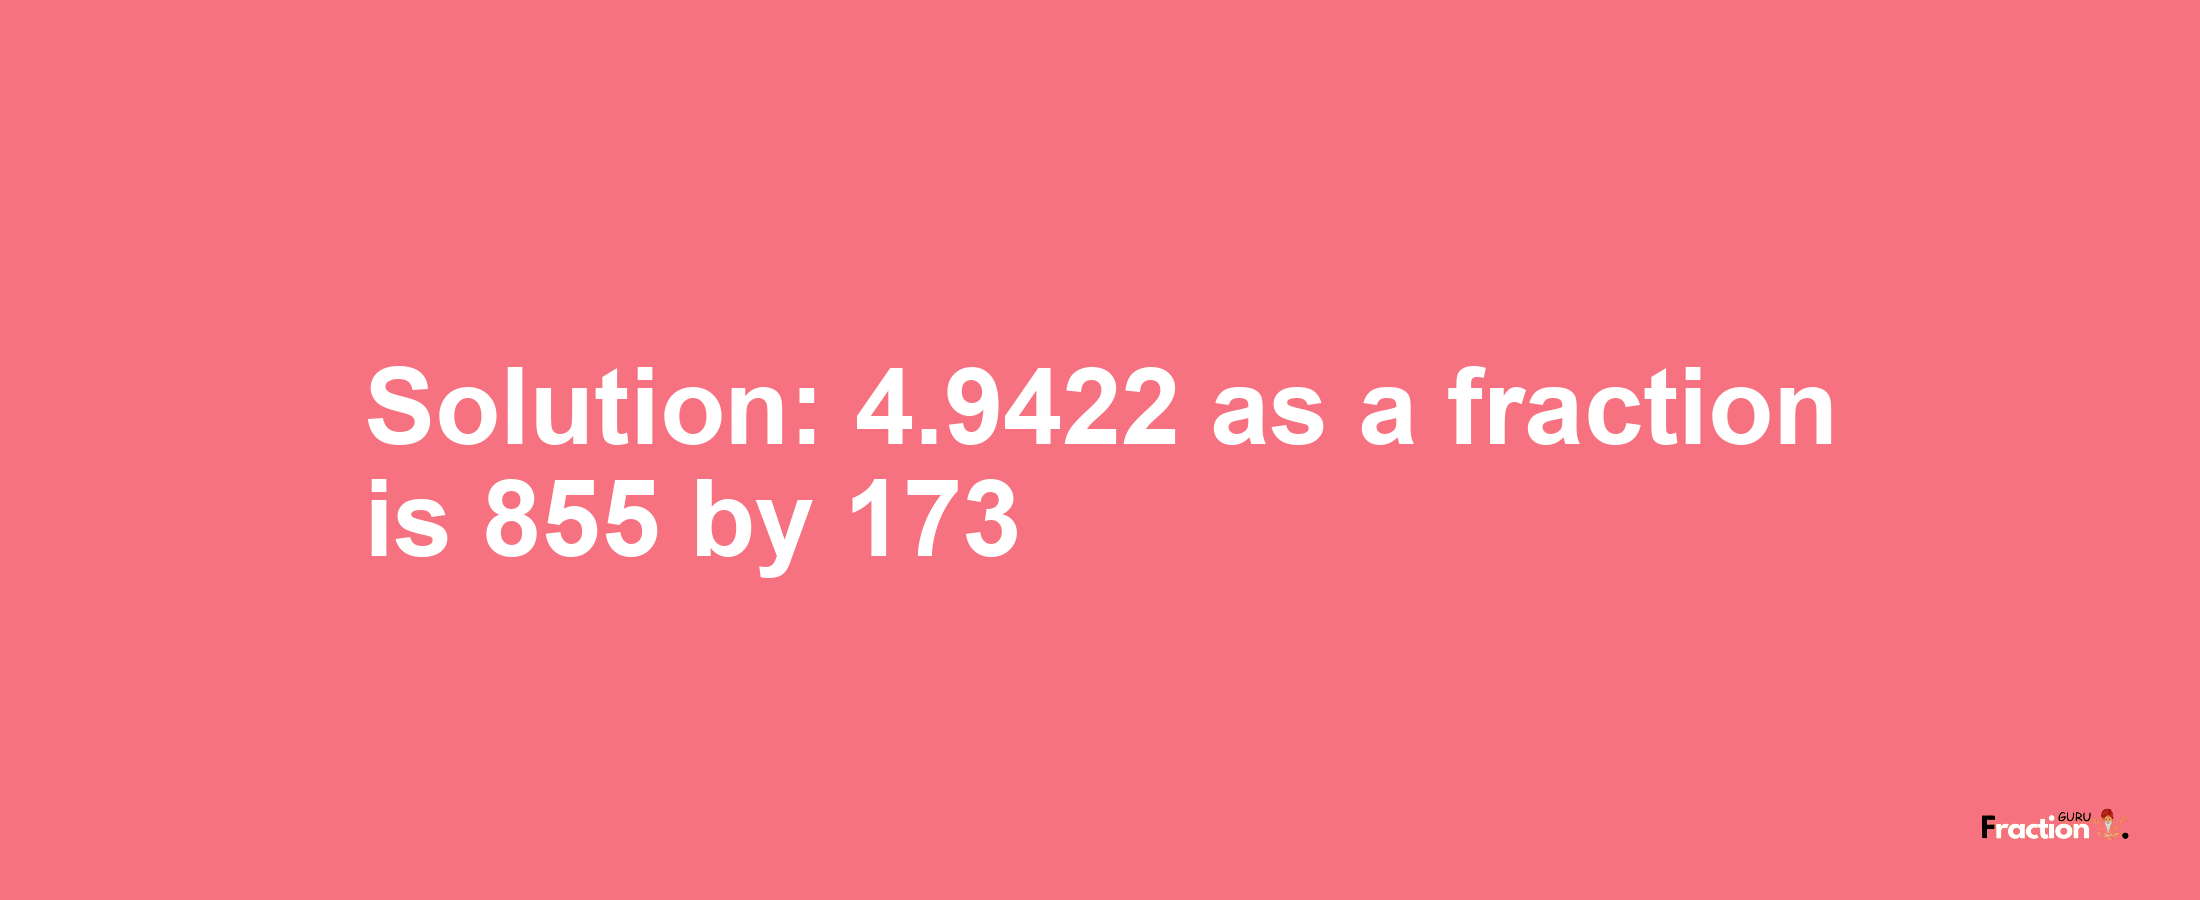 Solution:4.9422 as a fraction is 855/173